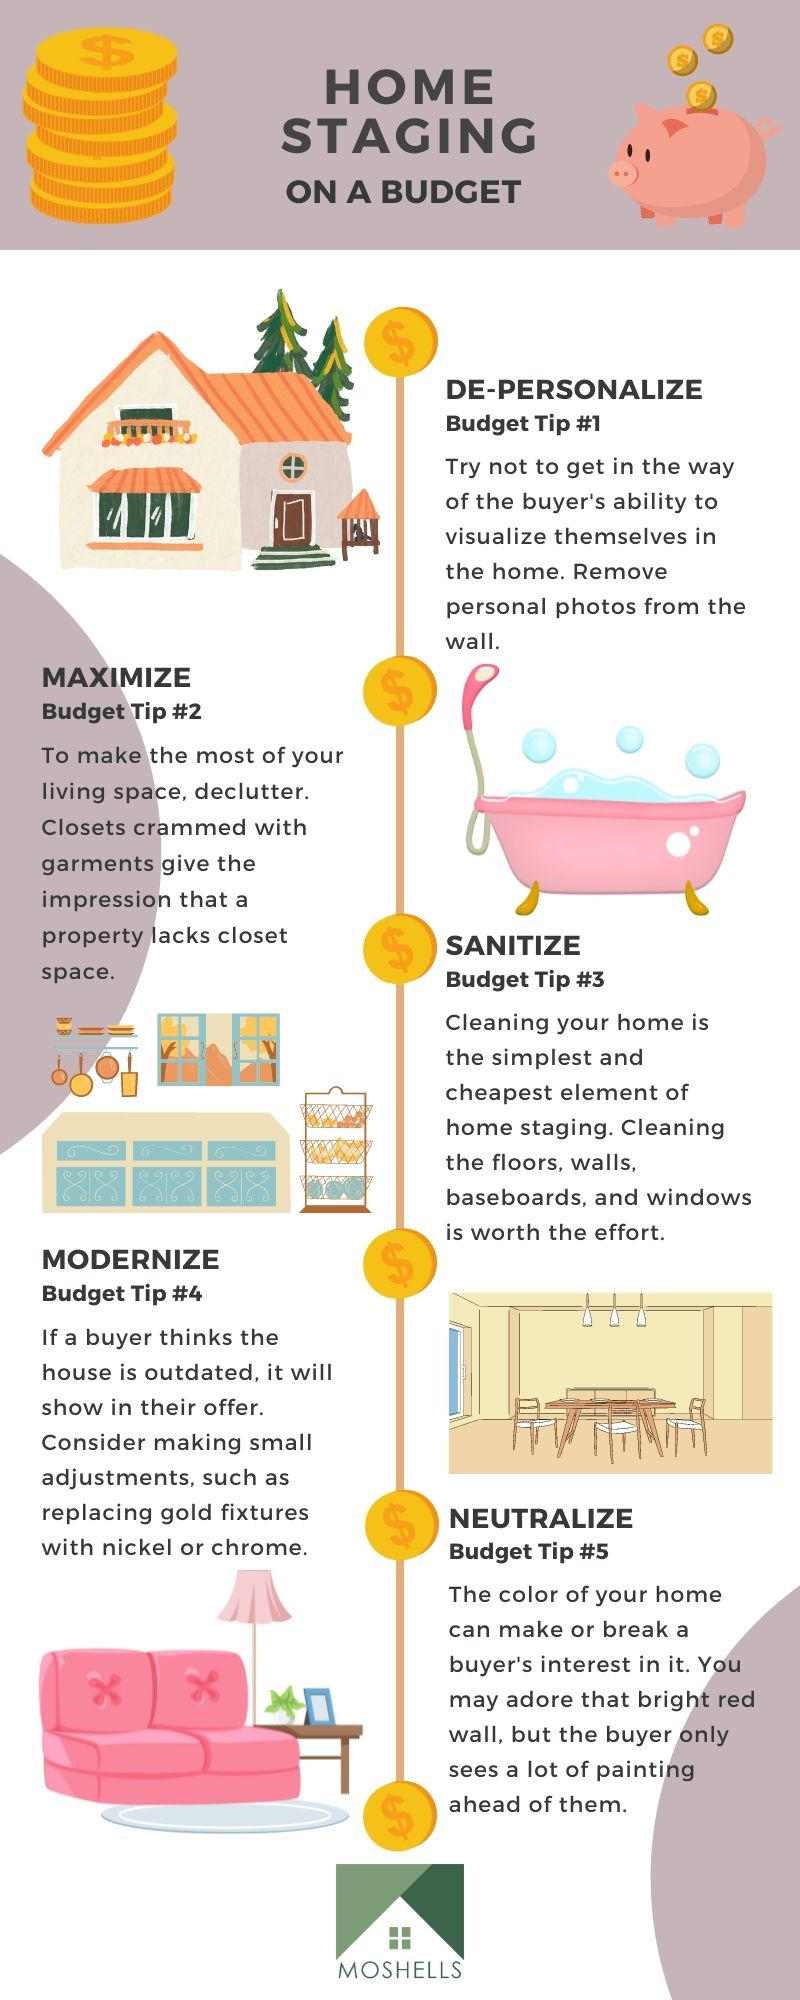 Infographic with tips for home staging on a budget